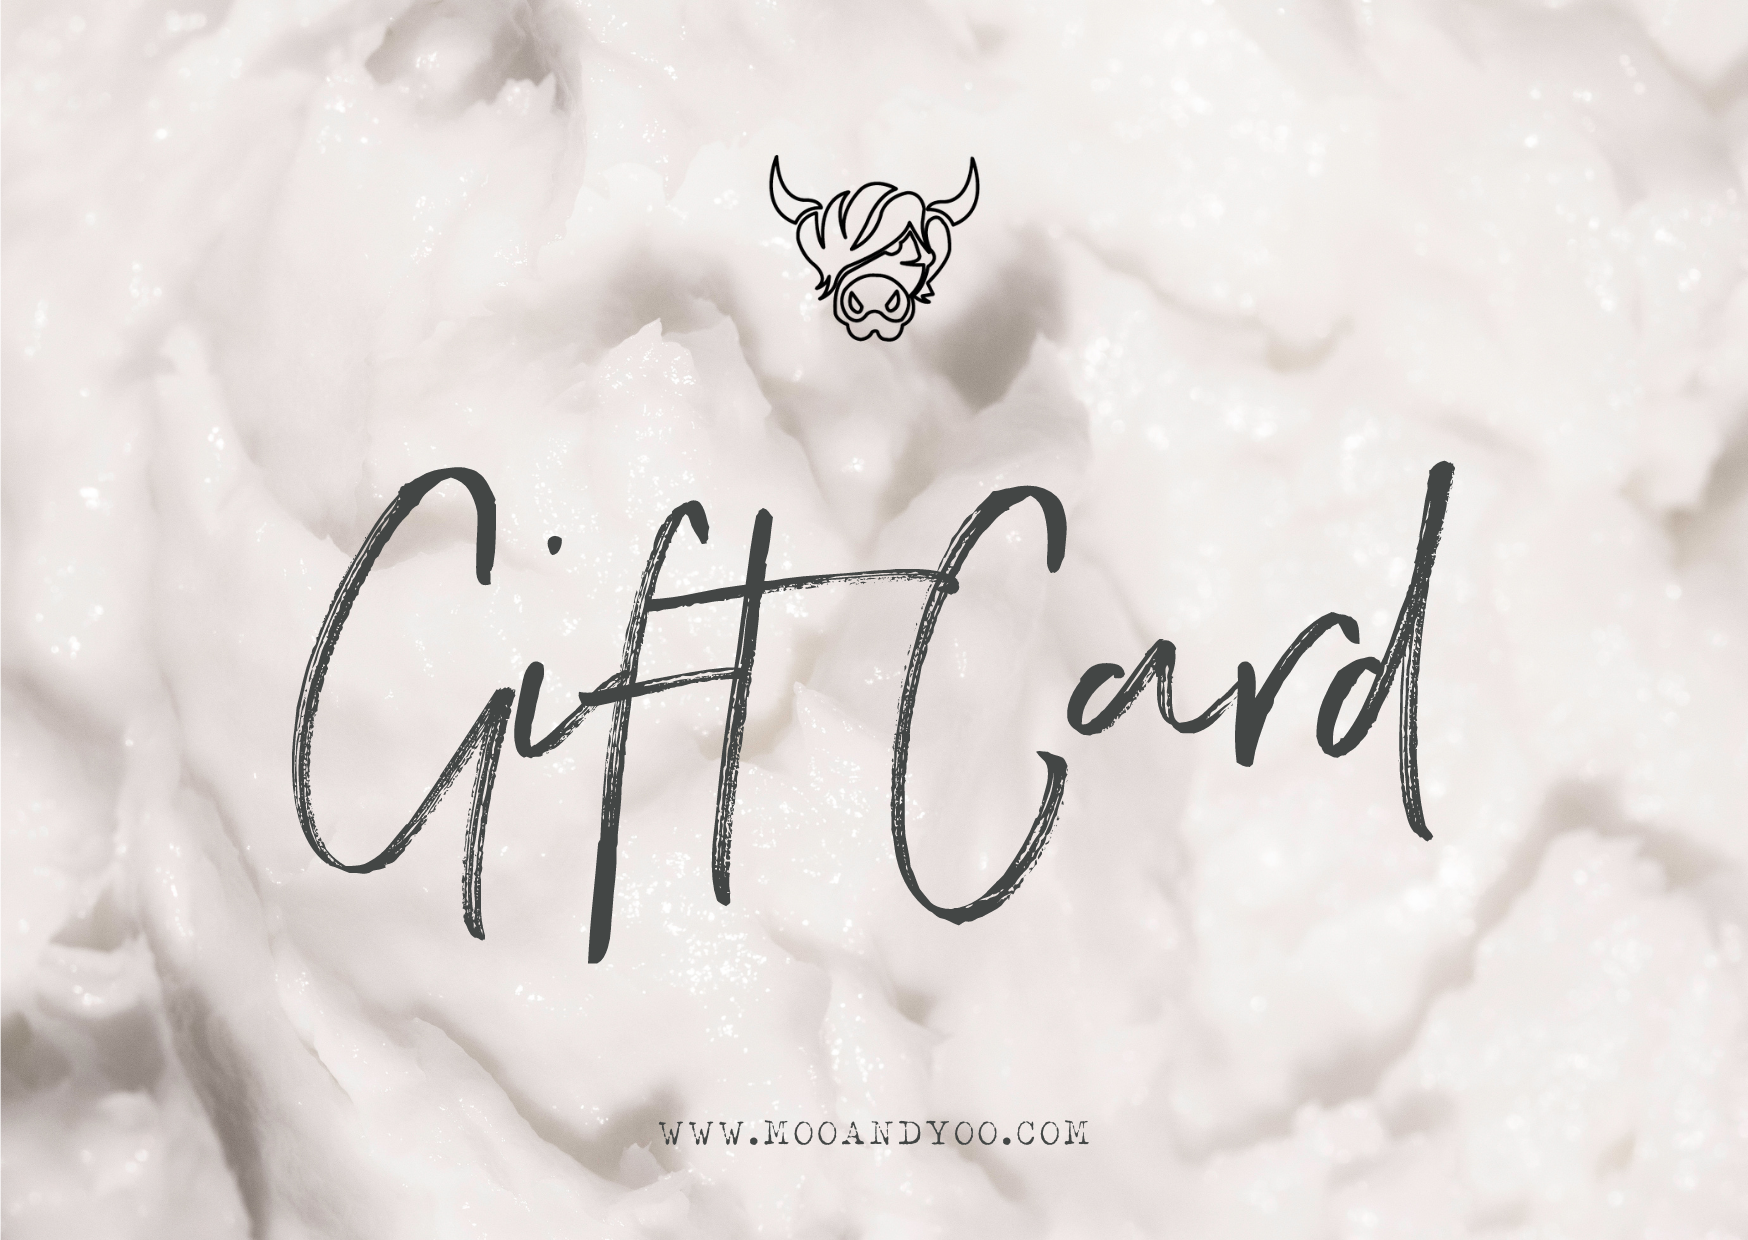 Gift card with the moo logo on white background